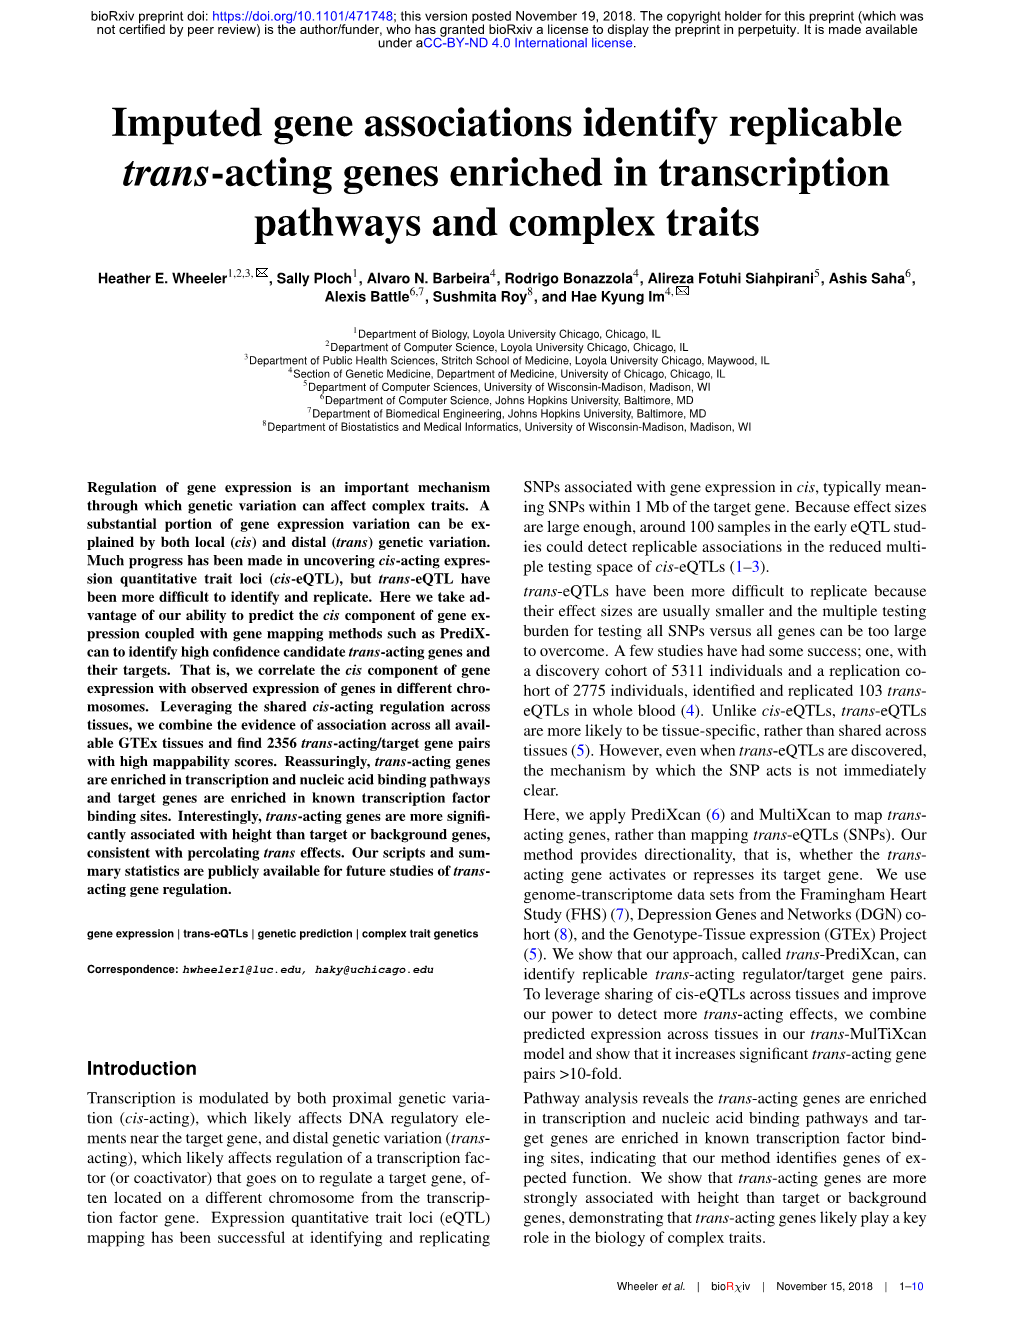 Imputed Gene Associations Identify Replicable Trans-Acting Genes Enriched in Transcription Pathways and Complex Traits